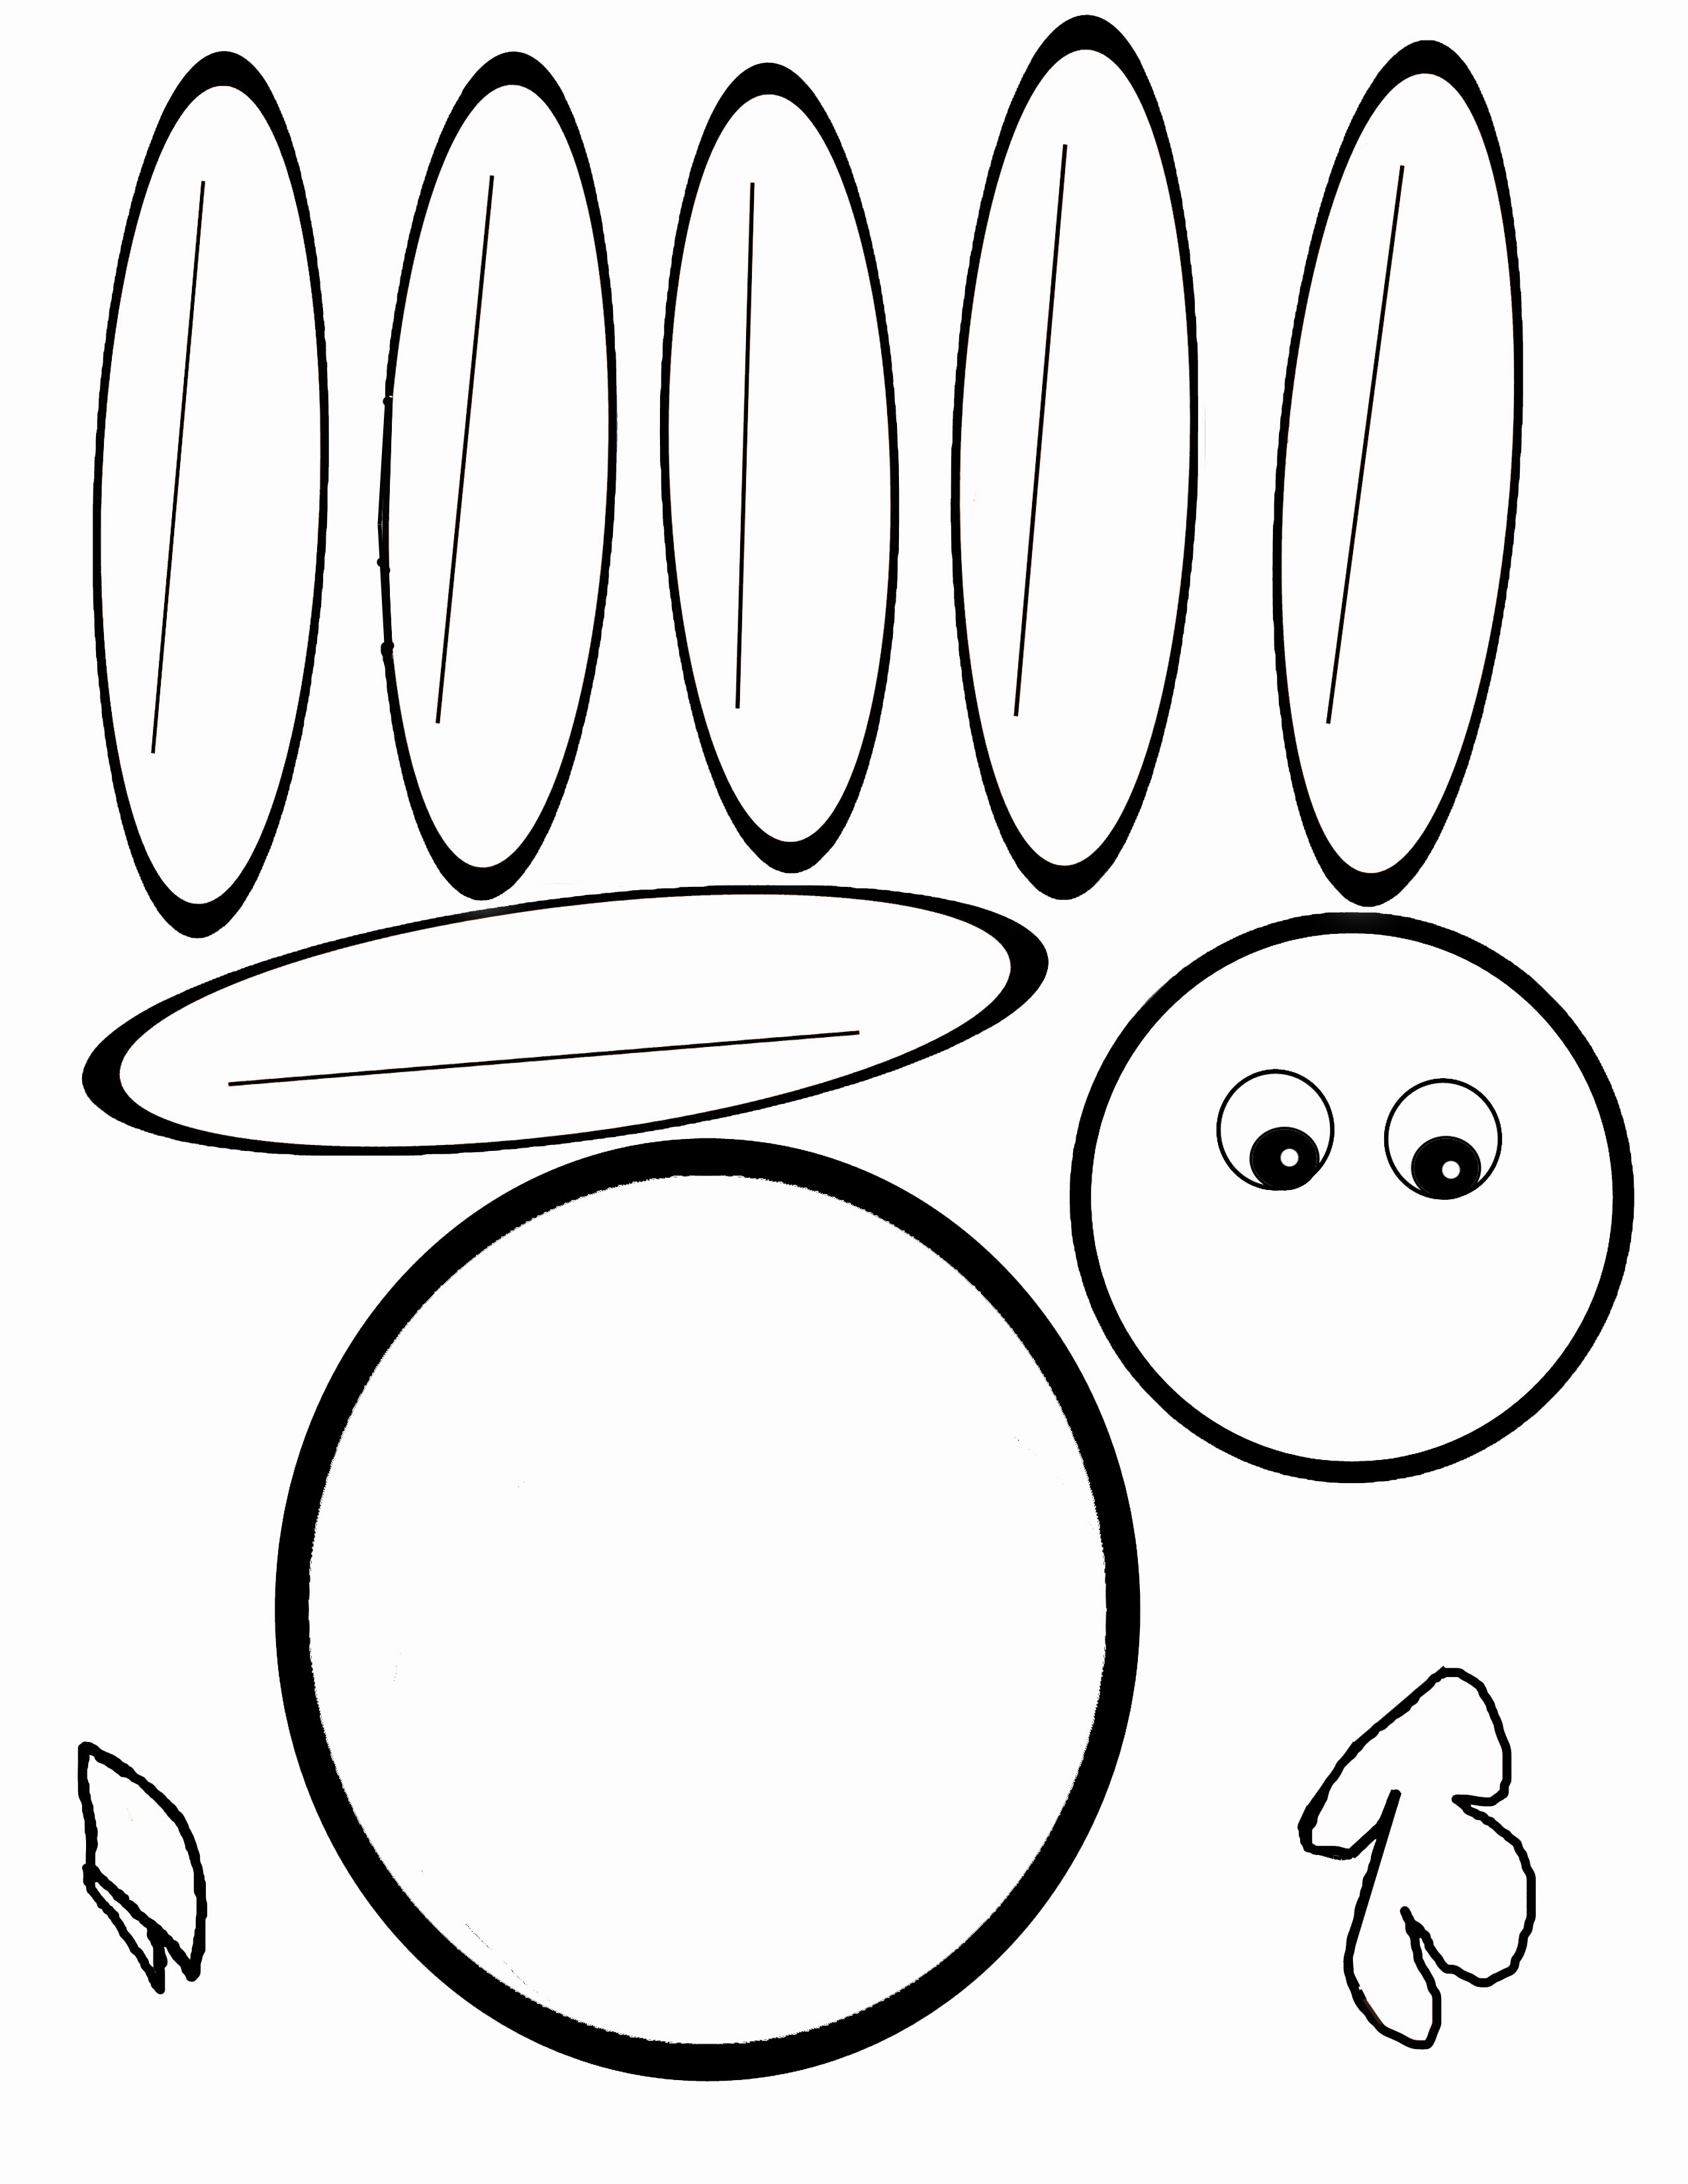 Free Printable Turkey Templates – Happy Easter &amp;amp; Thanksgiving 2018 - Free Turkey Cut Out Printable